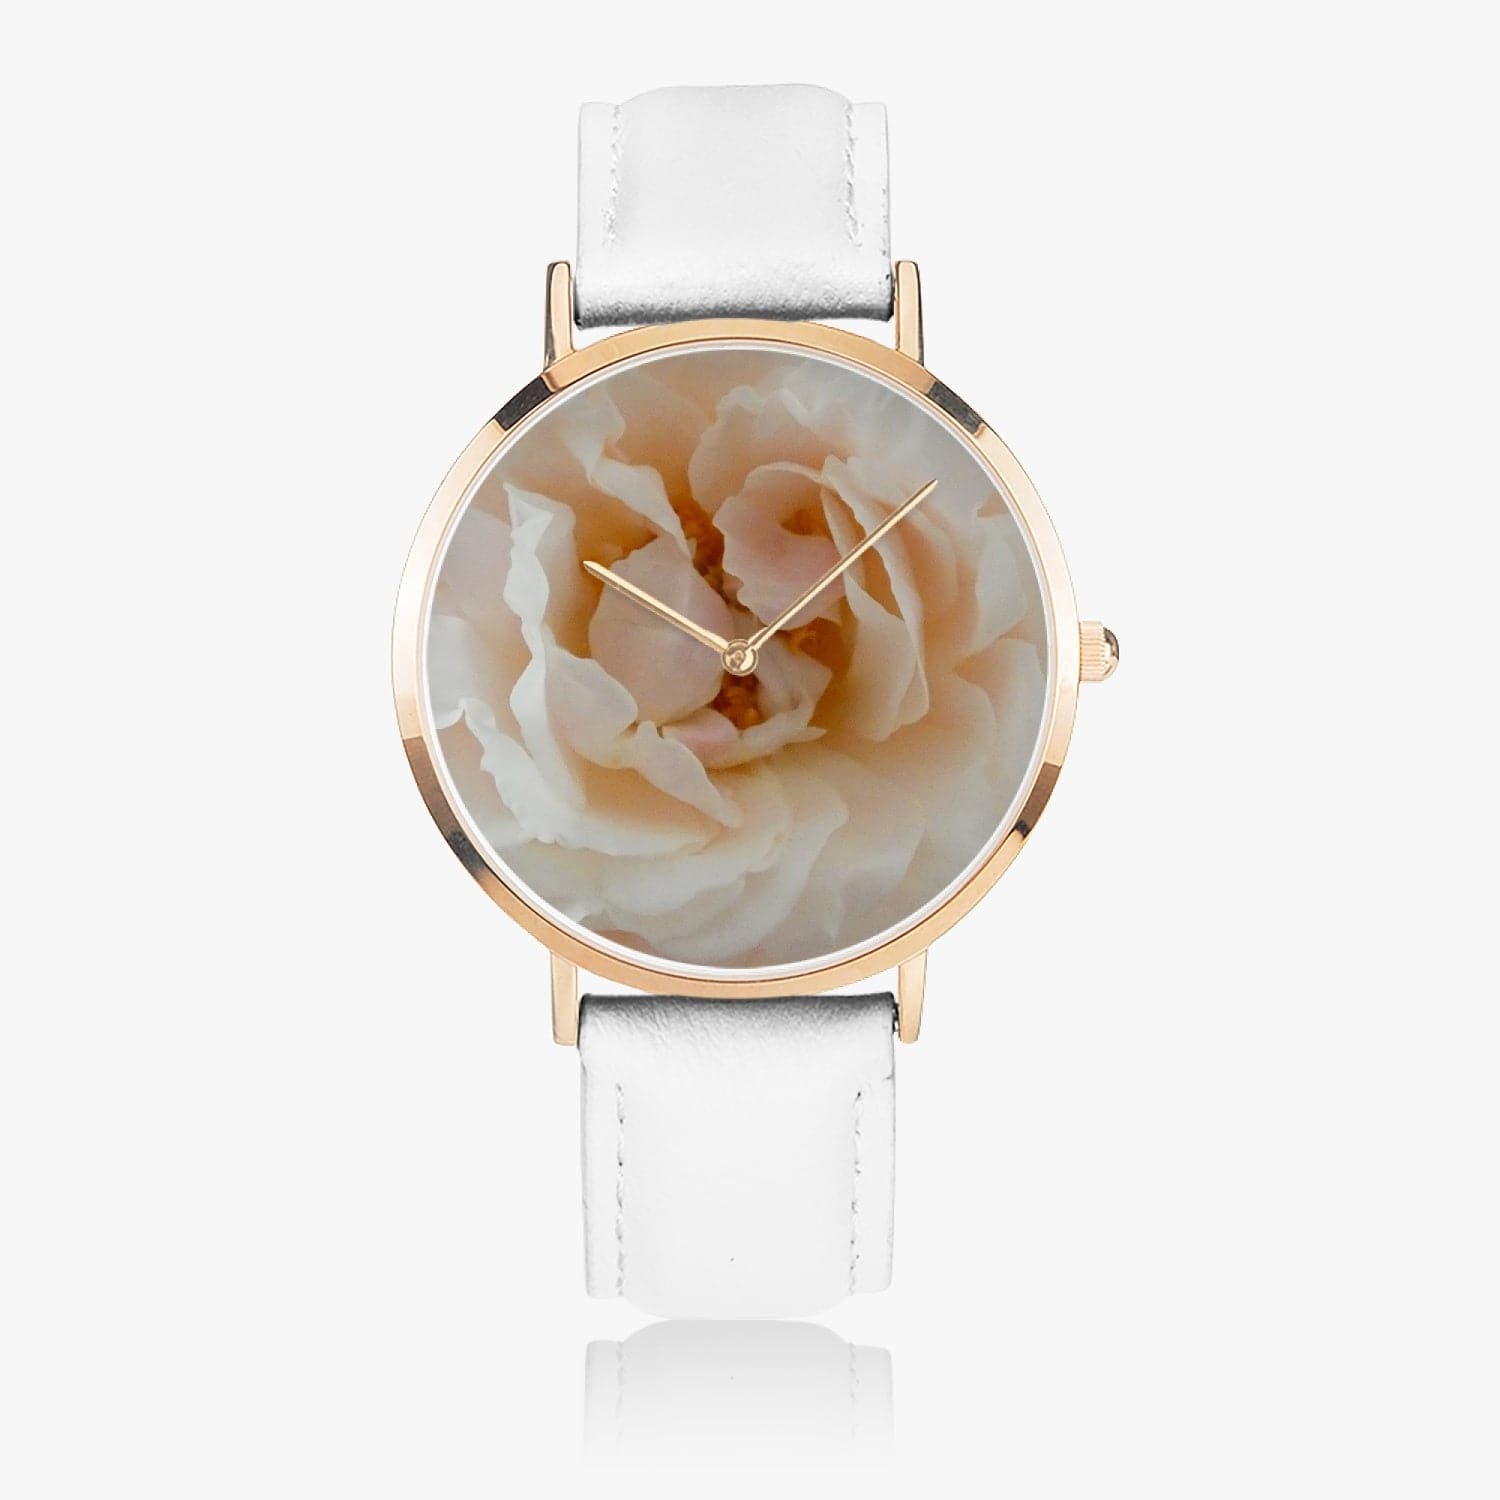 The Soul of a Rose, Hot Selling Ultra-Thin Leather Strap Quartz Watch (Rose Gold)